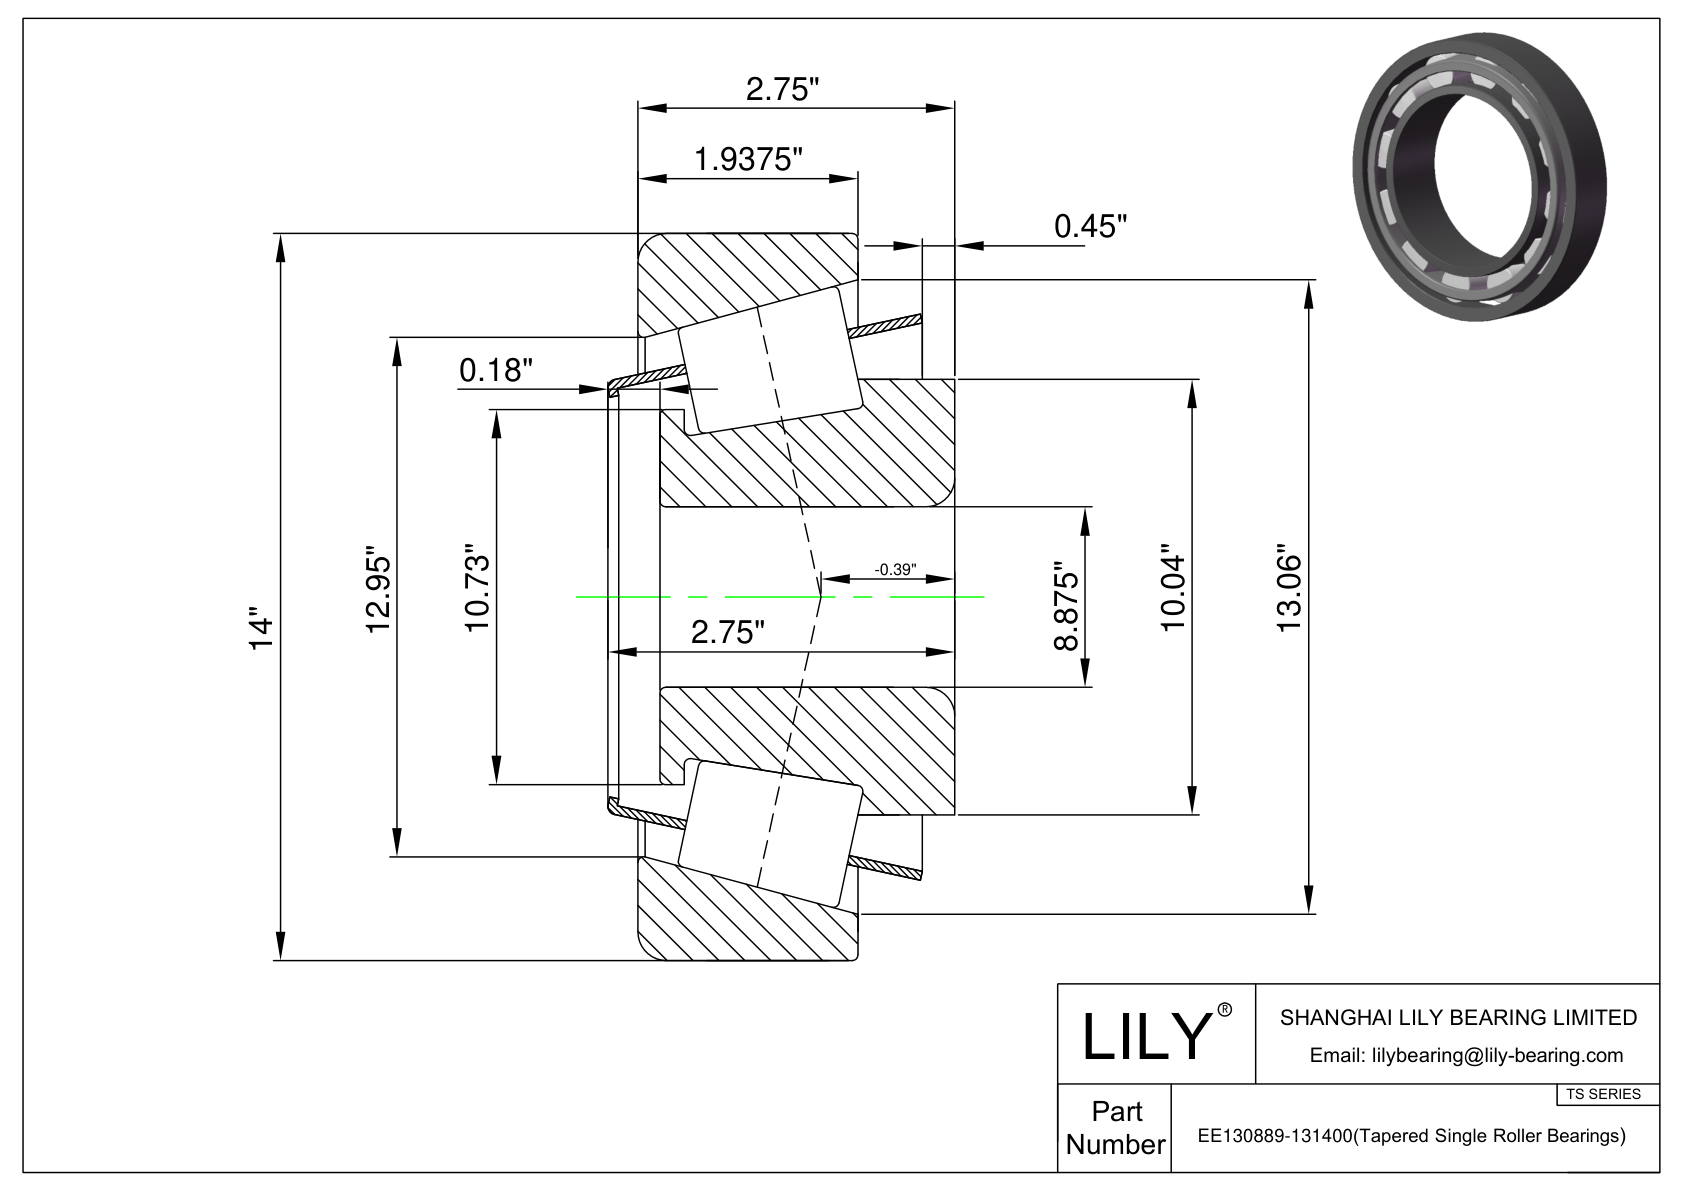 EE130889-131400 TS (Tapered Single Roller Bearings) (Imperial) cad drawing